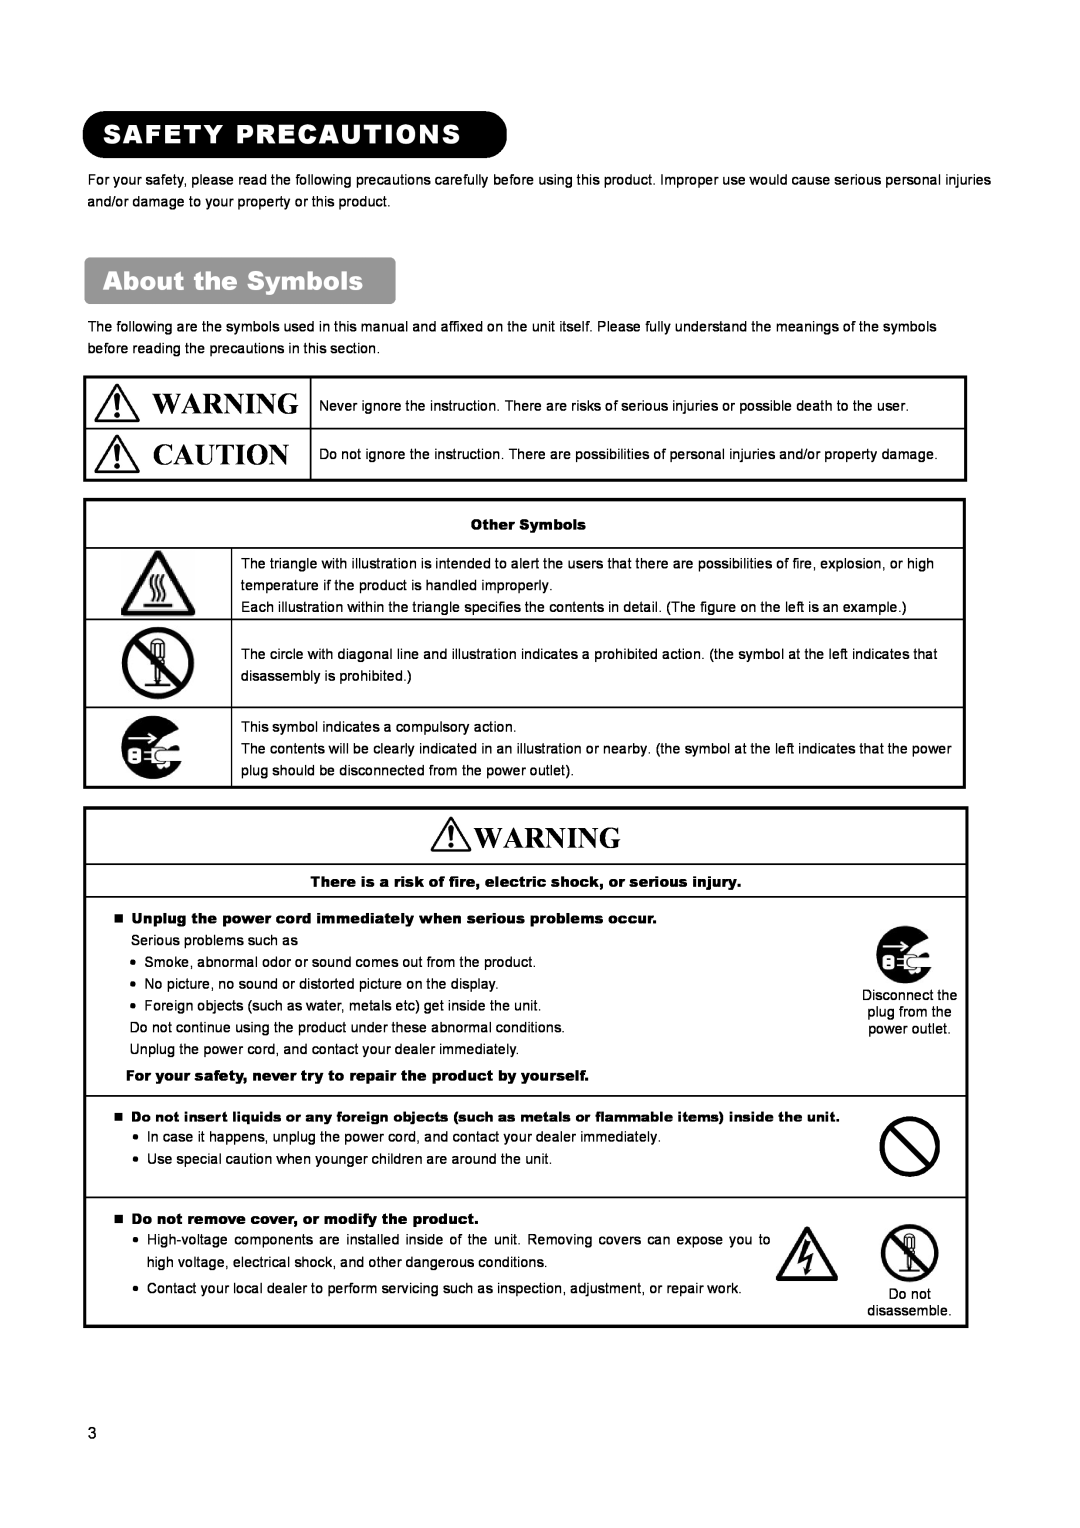 Hitachi L32A01A Safety Precautions, About the Symbols, Other Symbols, „ Do not remove cover, or modify the product 